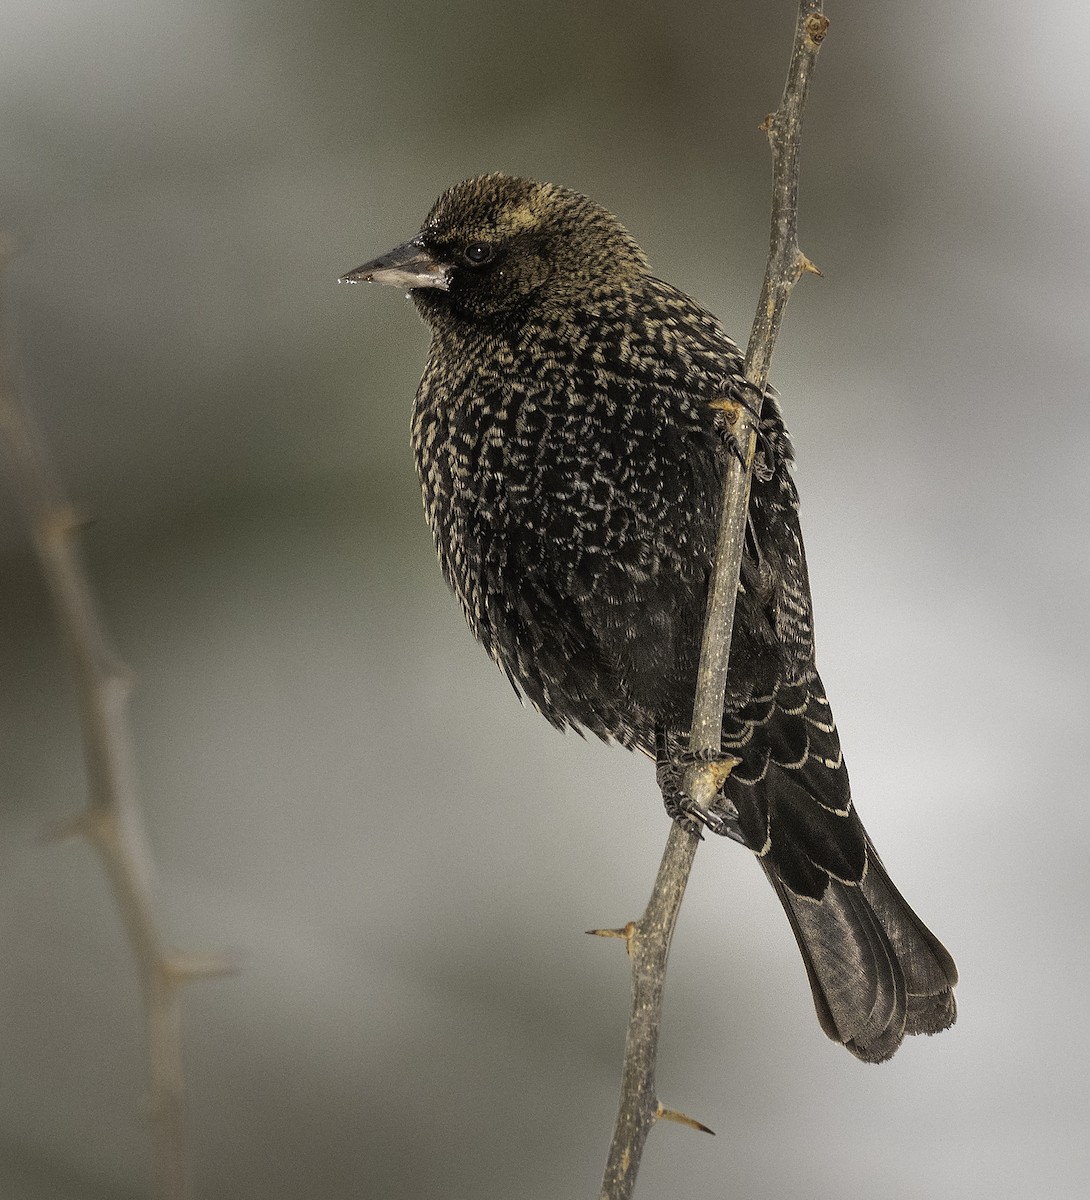 Red-winged Blackbird - Ian Routley